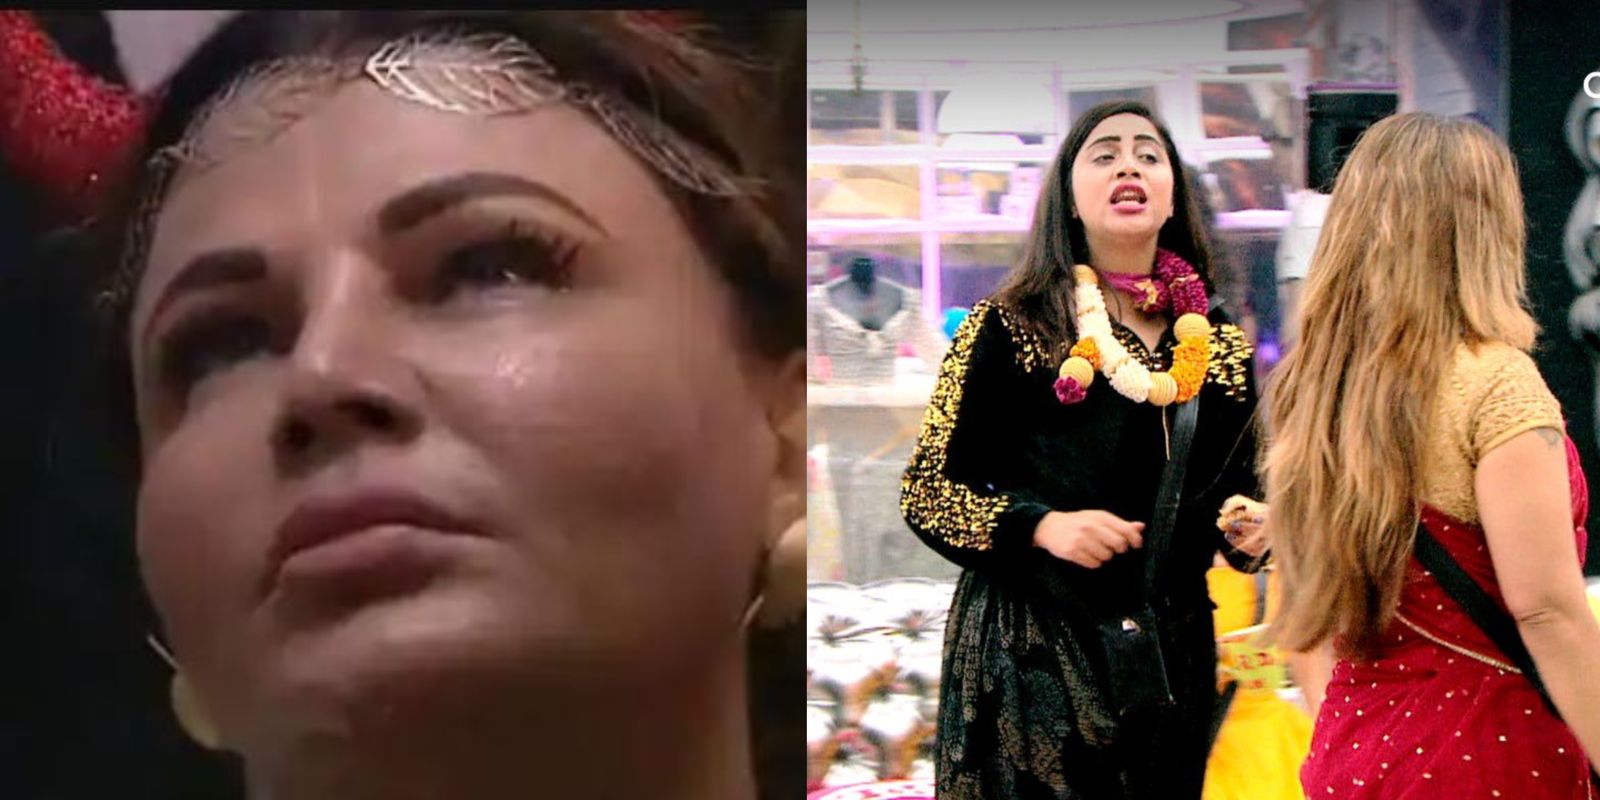 Bigg Boss 14 Highlights: Rakhi Sawant Cries After Fight With Eijaz, Captaincy Task Announced